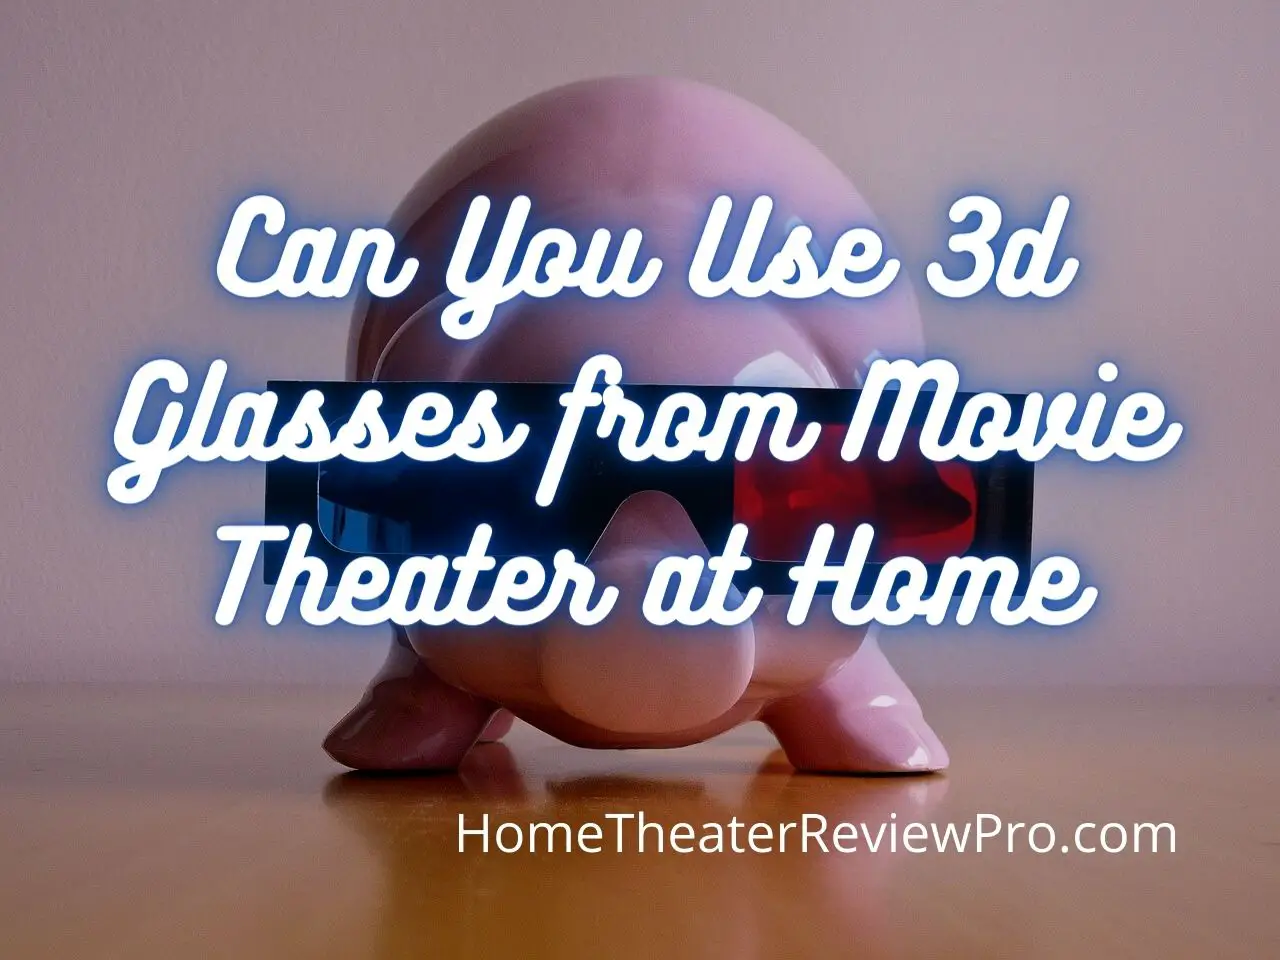 Can You Use 3d Glasses from Movie Theater at Home